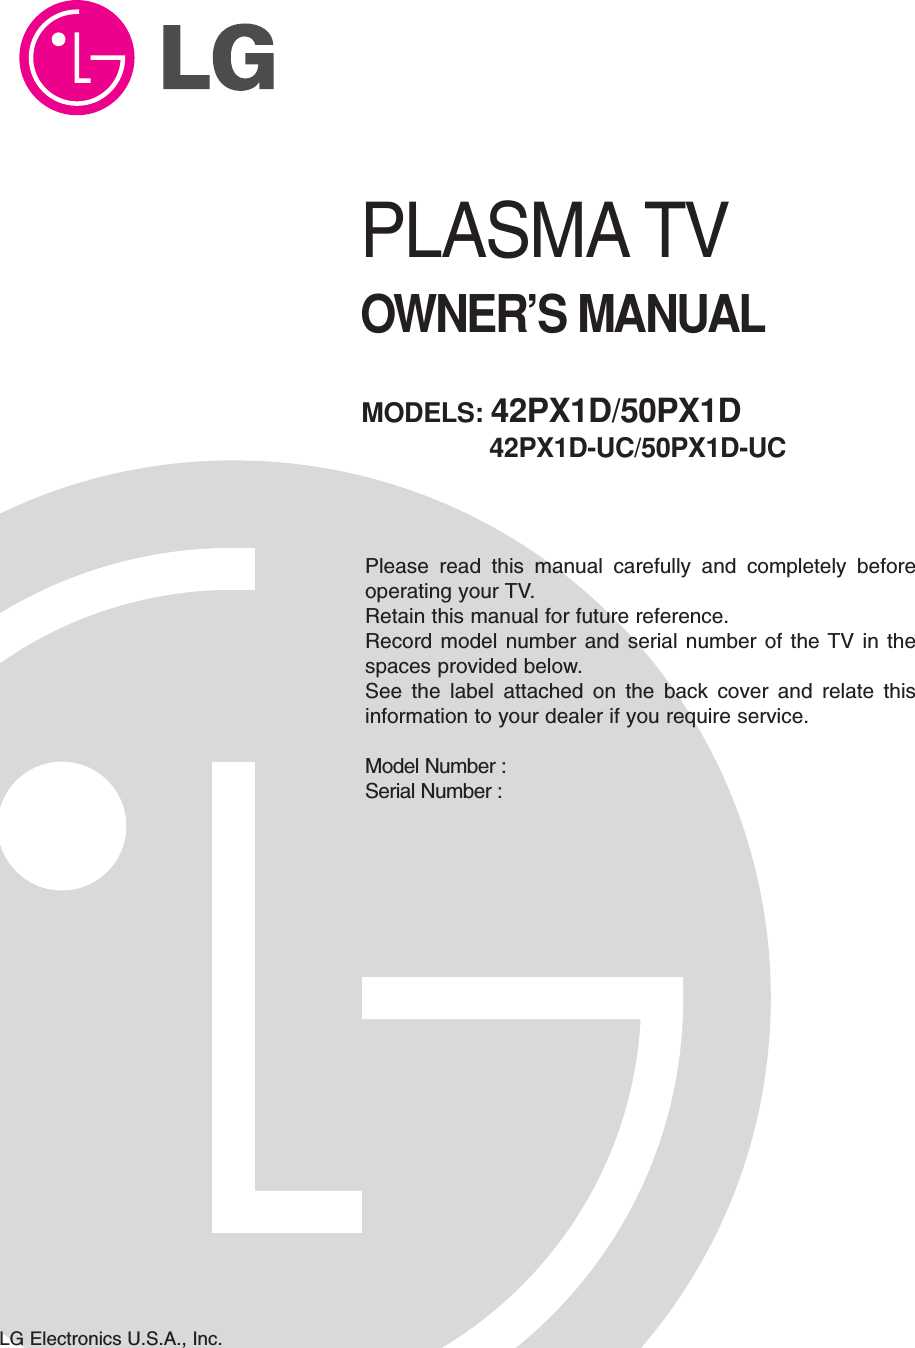 PLASMA TVOWNER’S MANUALPlease read this manual carefully and completely beforeoperating your TV. Retain this manual for future reference.Record model number and serial number of the TV in thespaces provided below. See the label attached on the back cover and relate thisinformation to your dealer if you require service.Model Number : Serial Number : MODELS: 42PX1D/50PX1D42PX1D-UC/50PX1D-UCLG Electronics U.S.A., Inc.